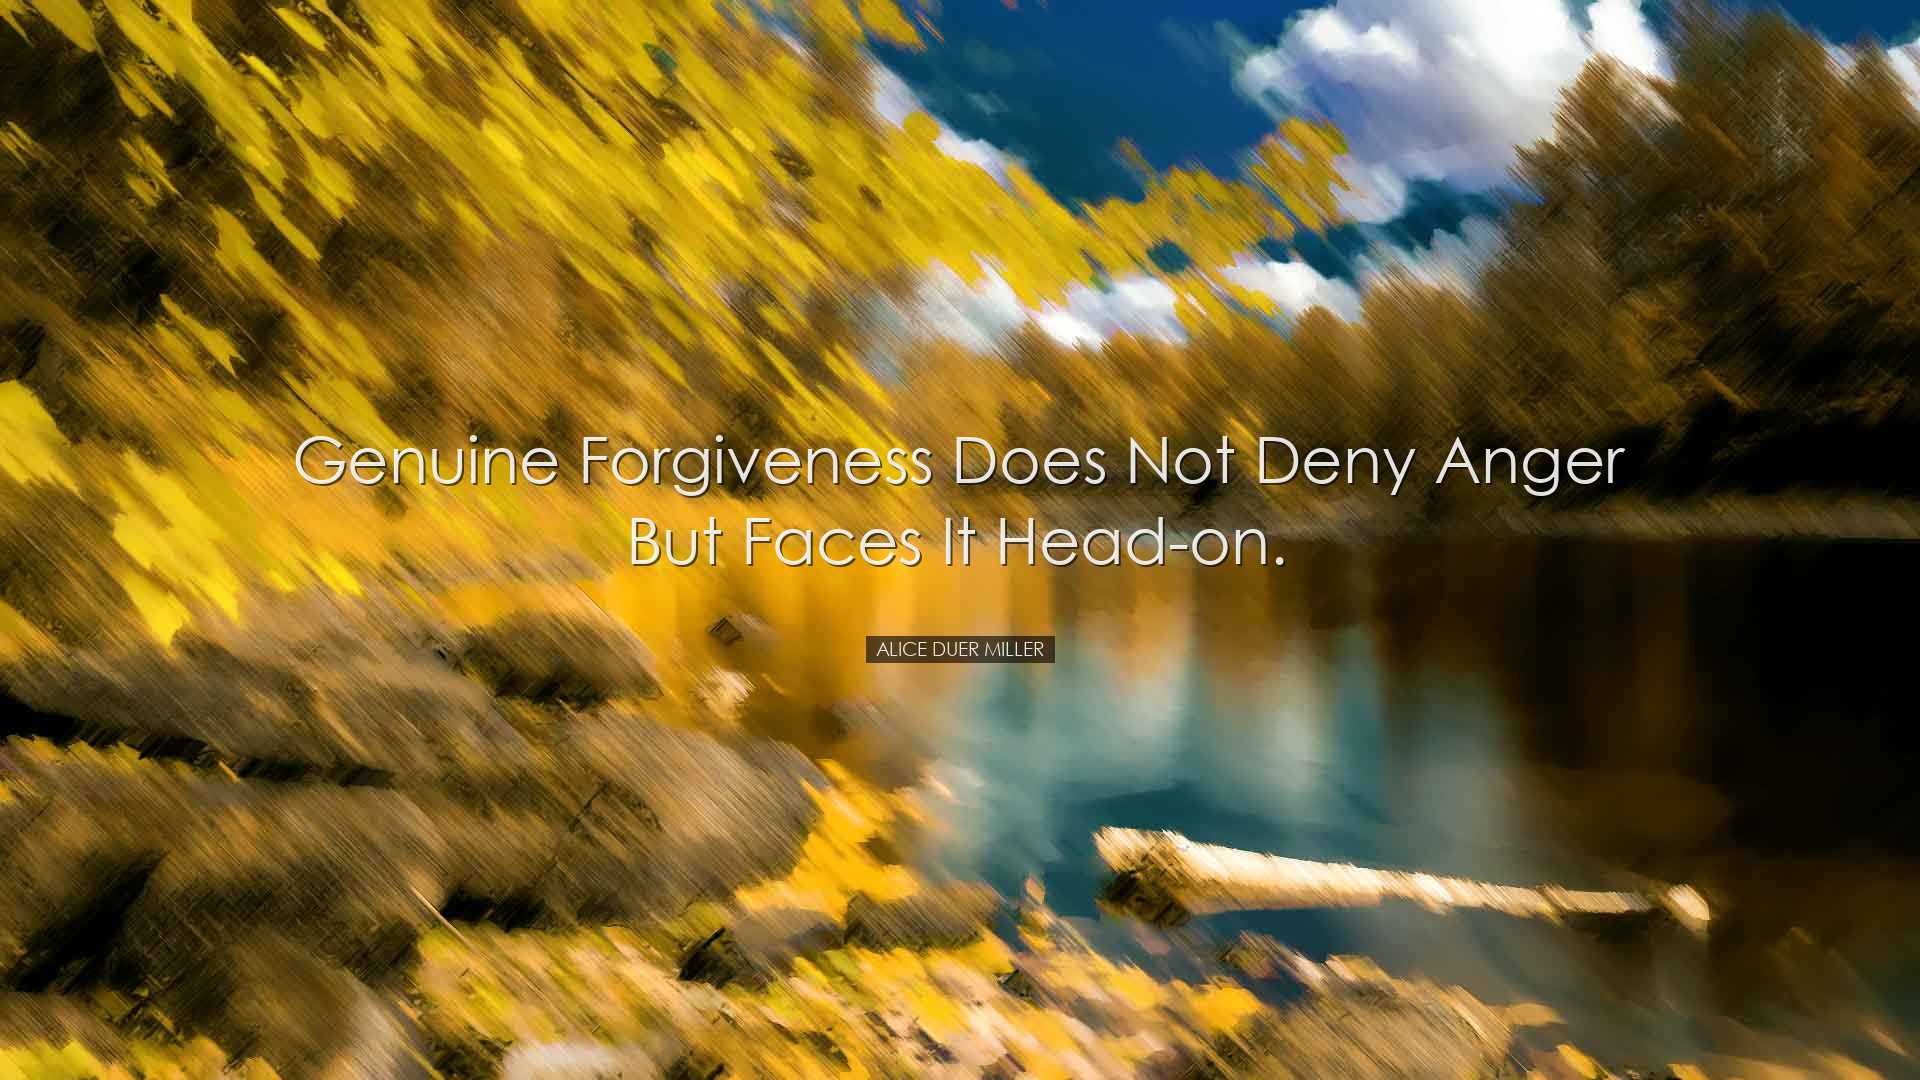 Genuine forgiveness does not deny anger but faces it head-on. - Al